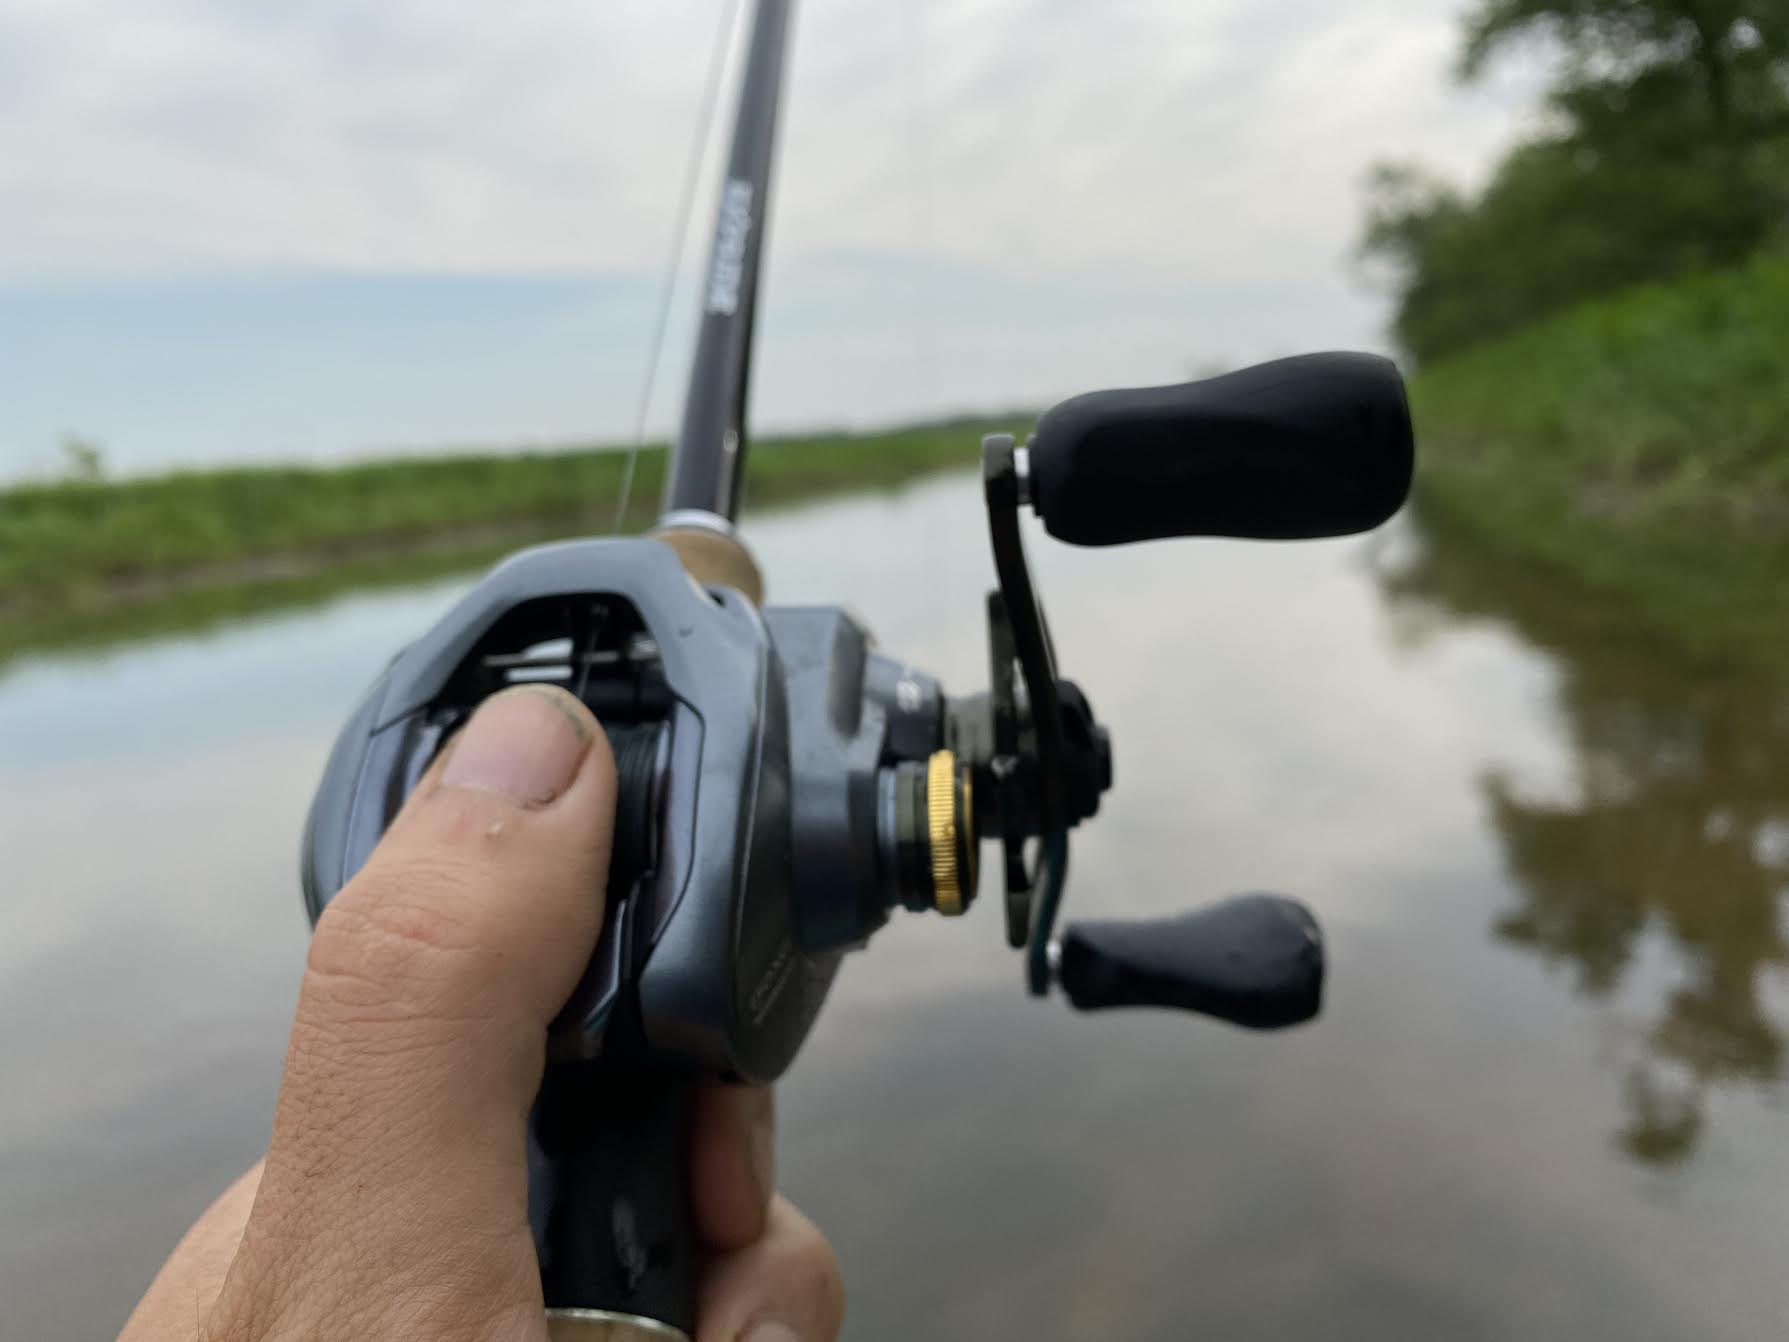 Why are Baitcasting Reels Right-Handed? [Avoid the Switch!]